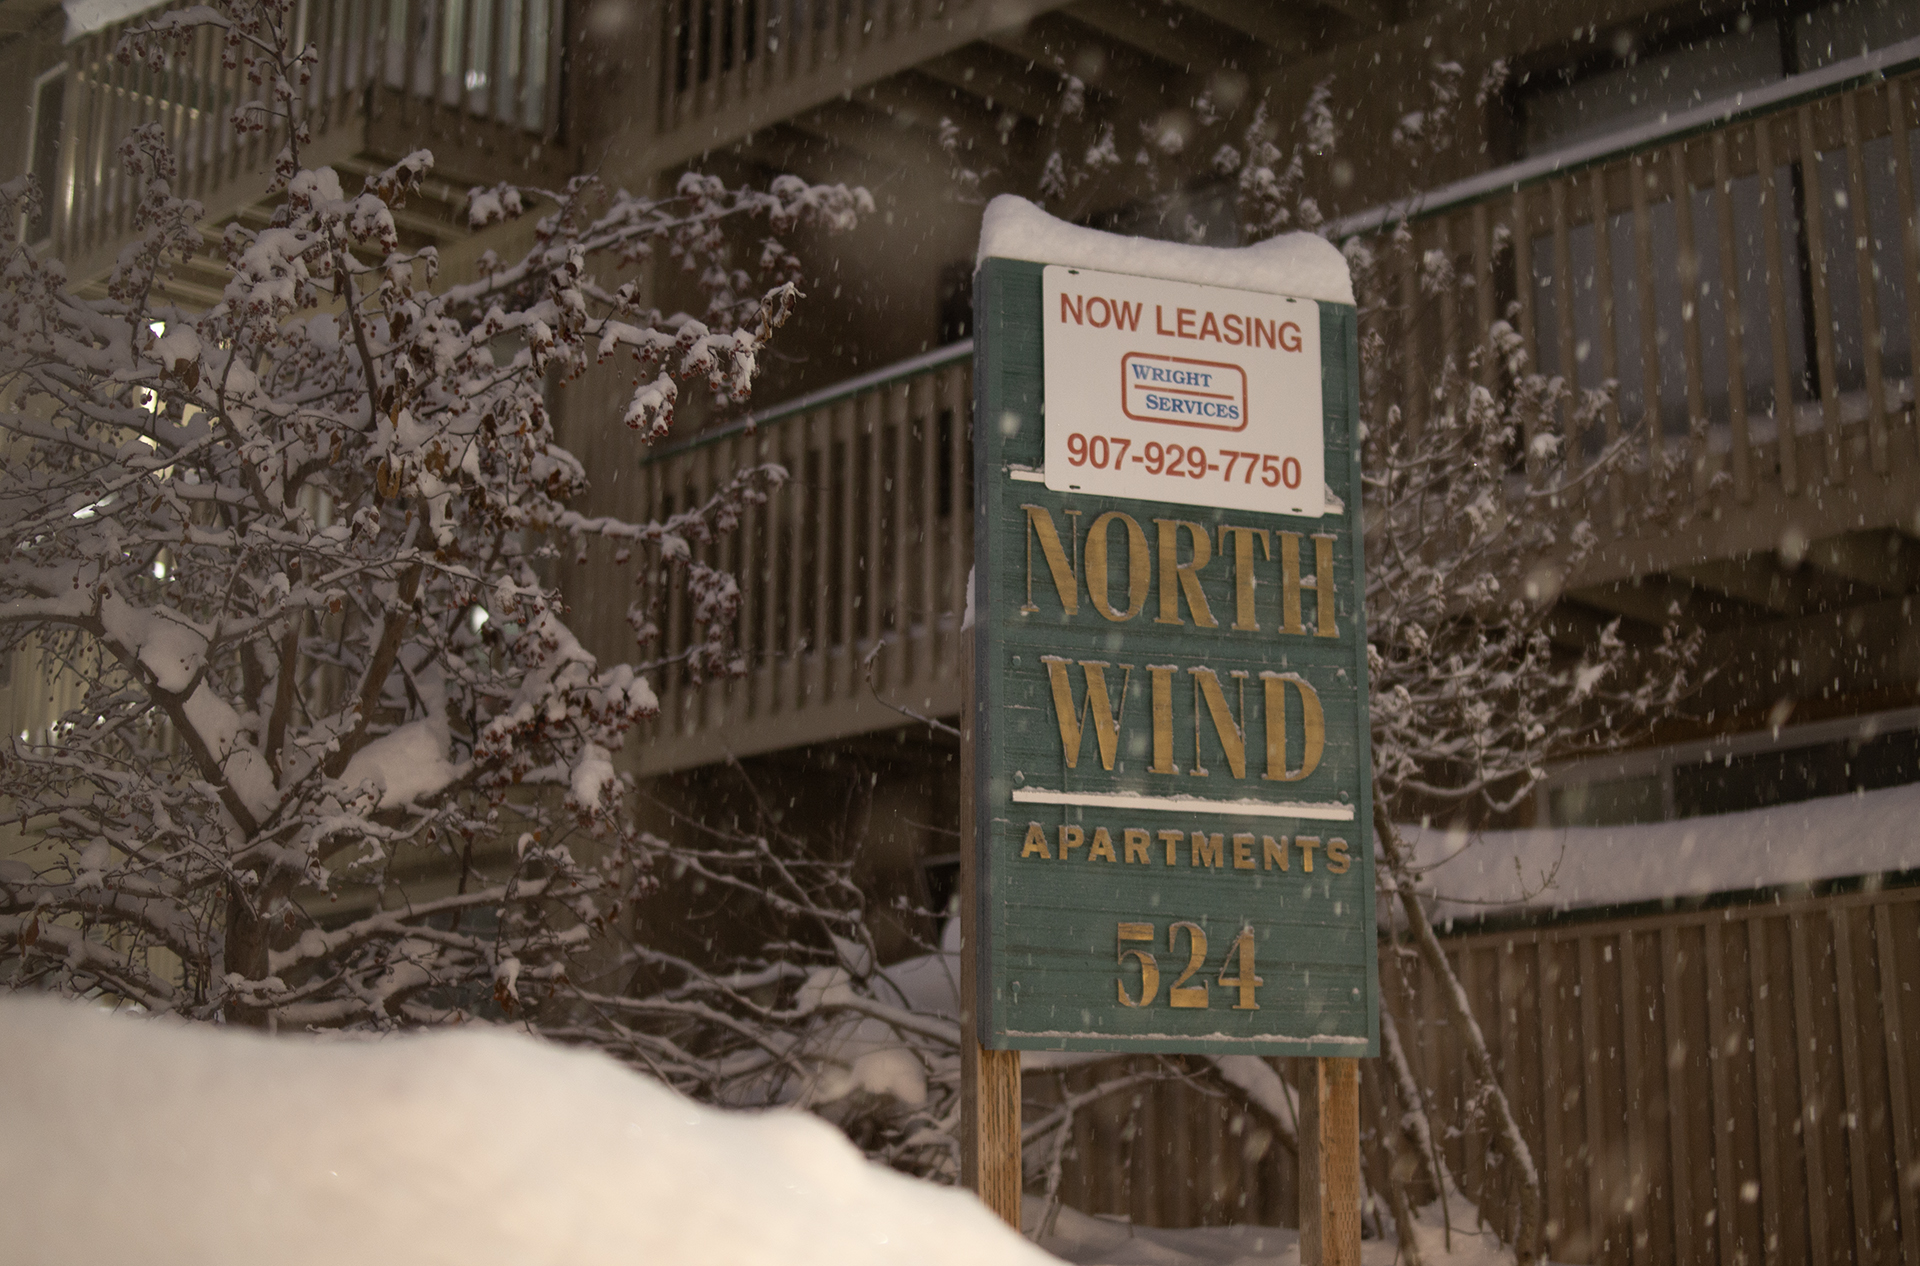 North Wind Apartments with "Now Leasing" sign (for rent)